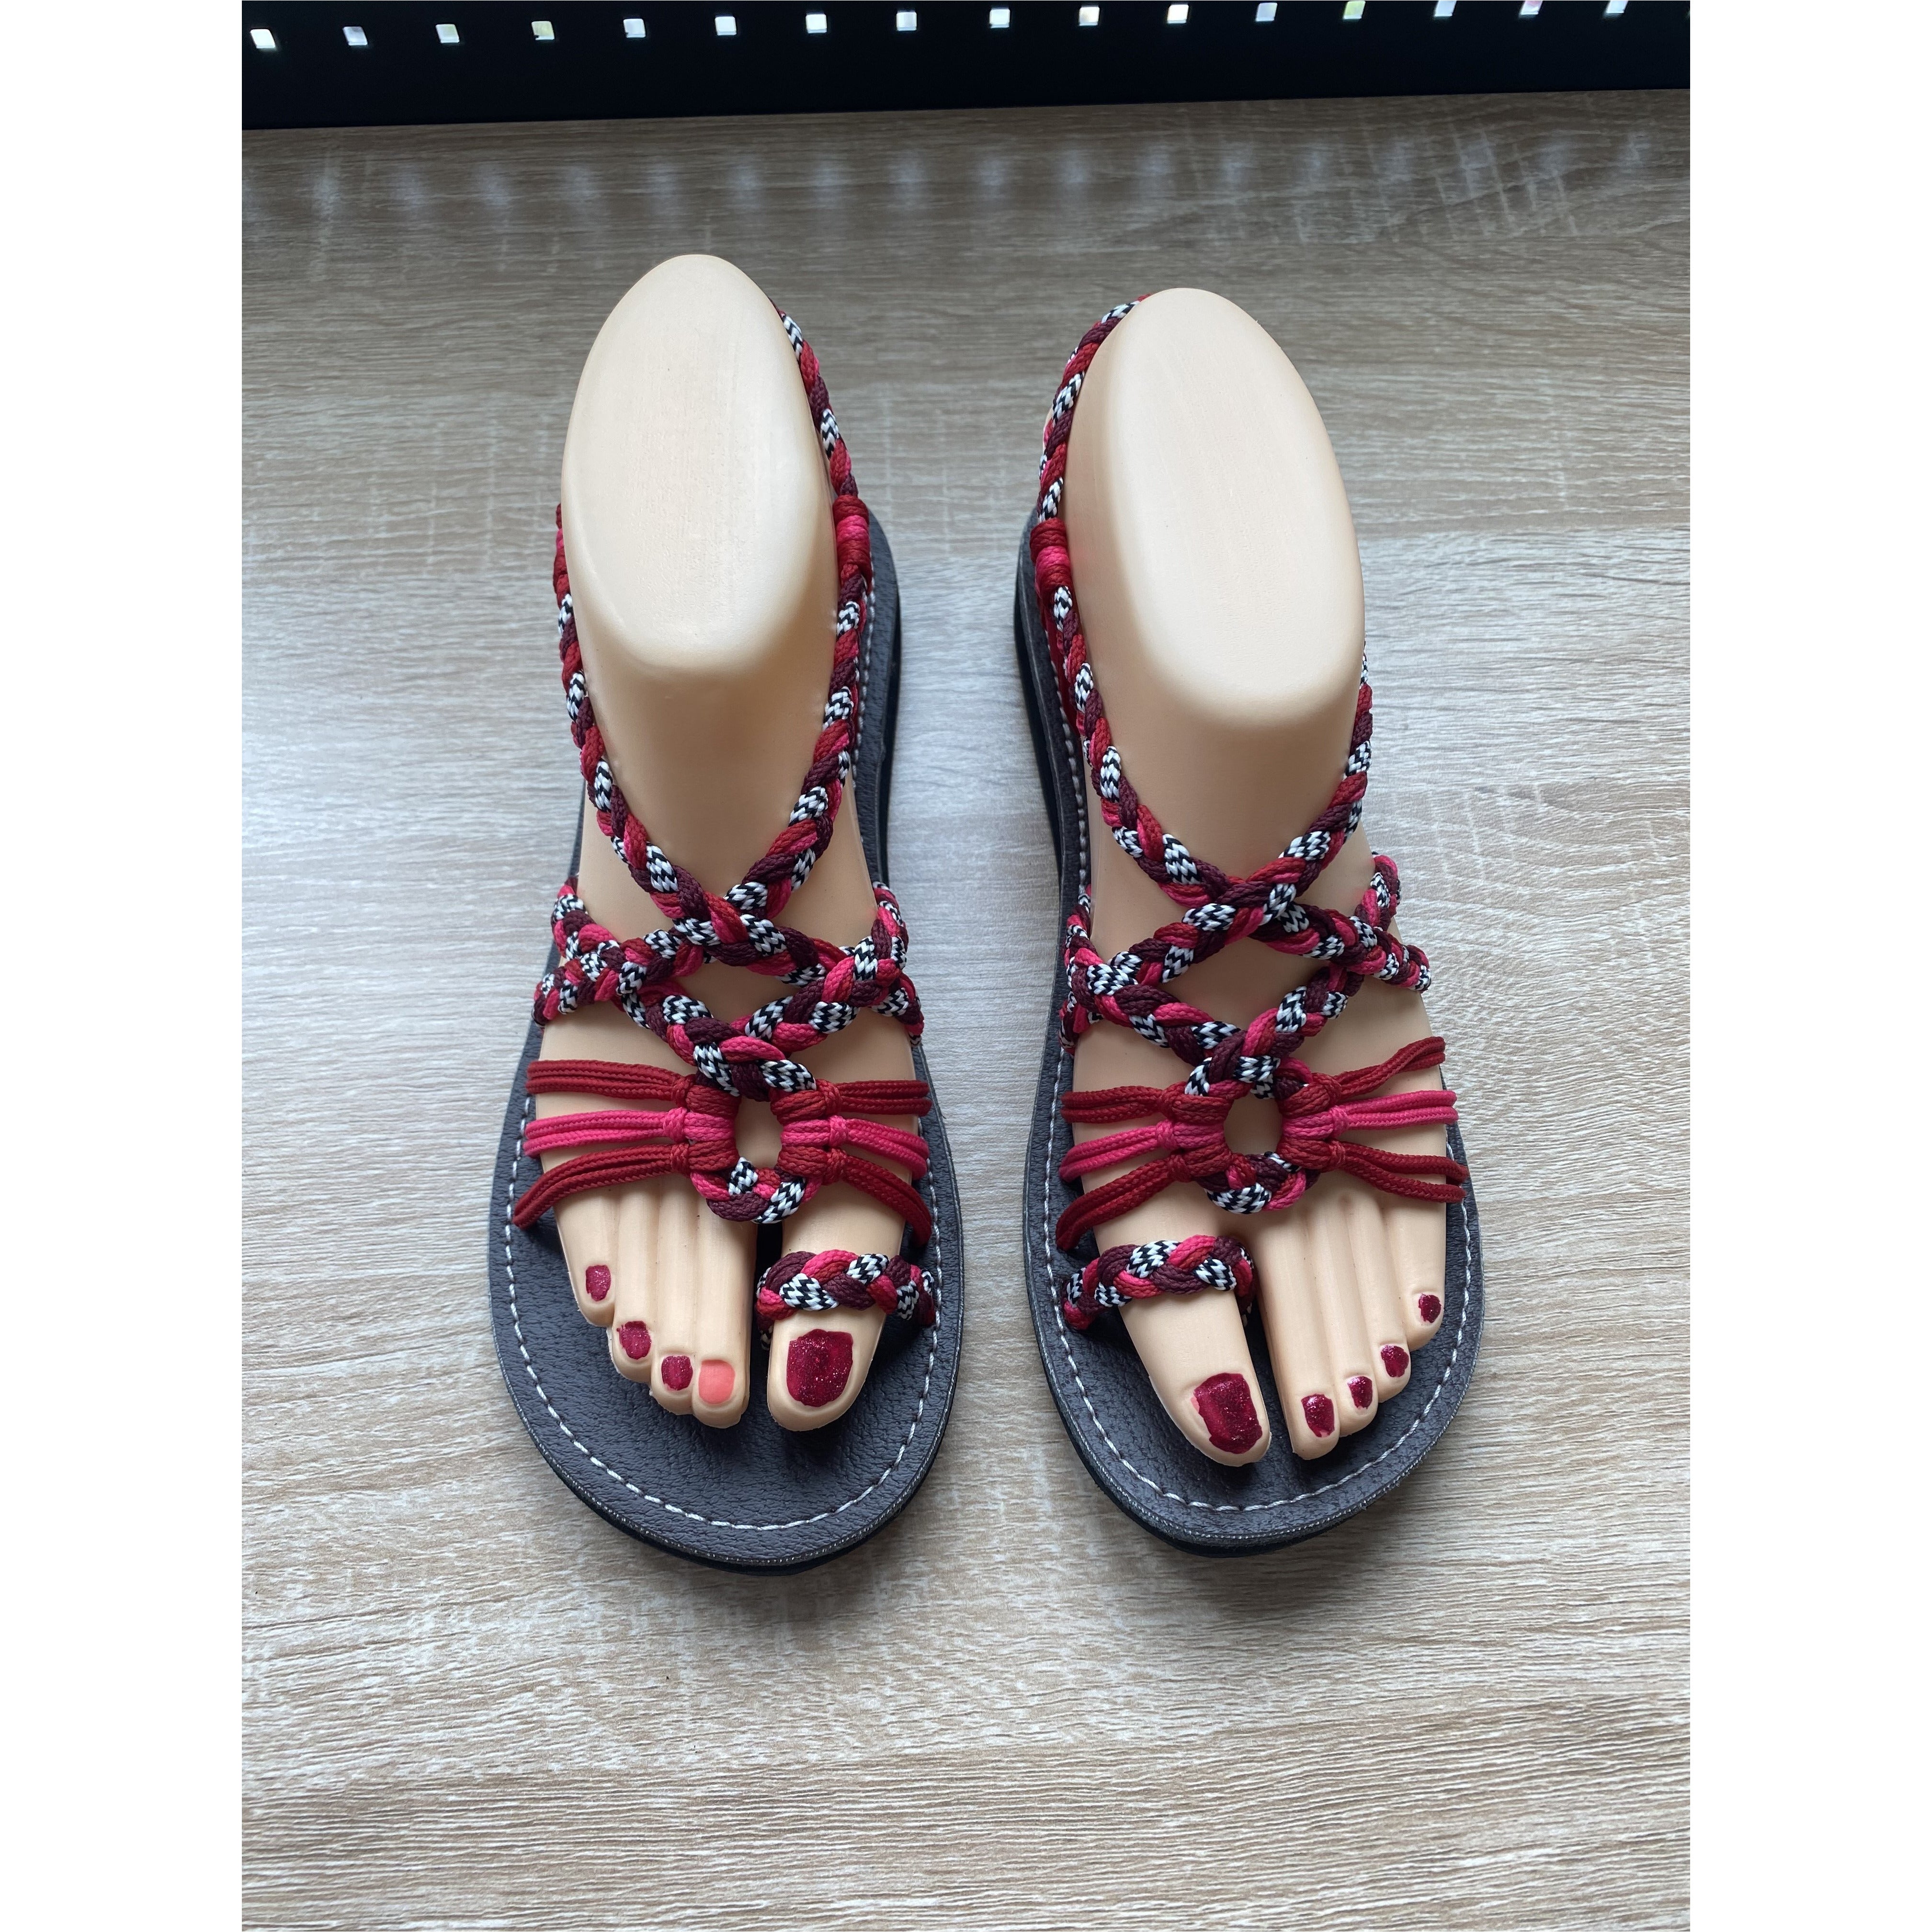 Shoes - Braided Sandal RED/PINK